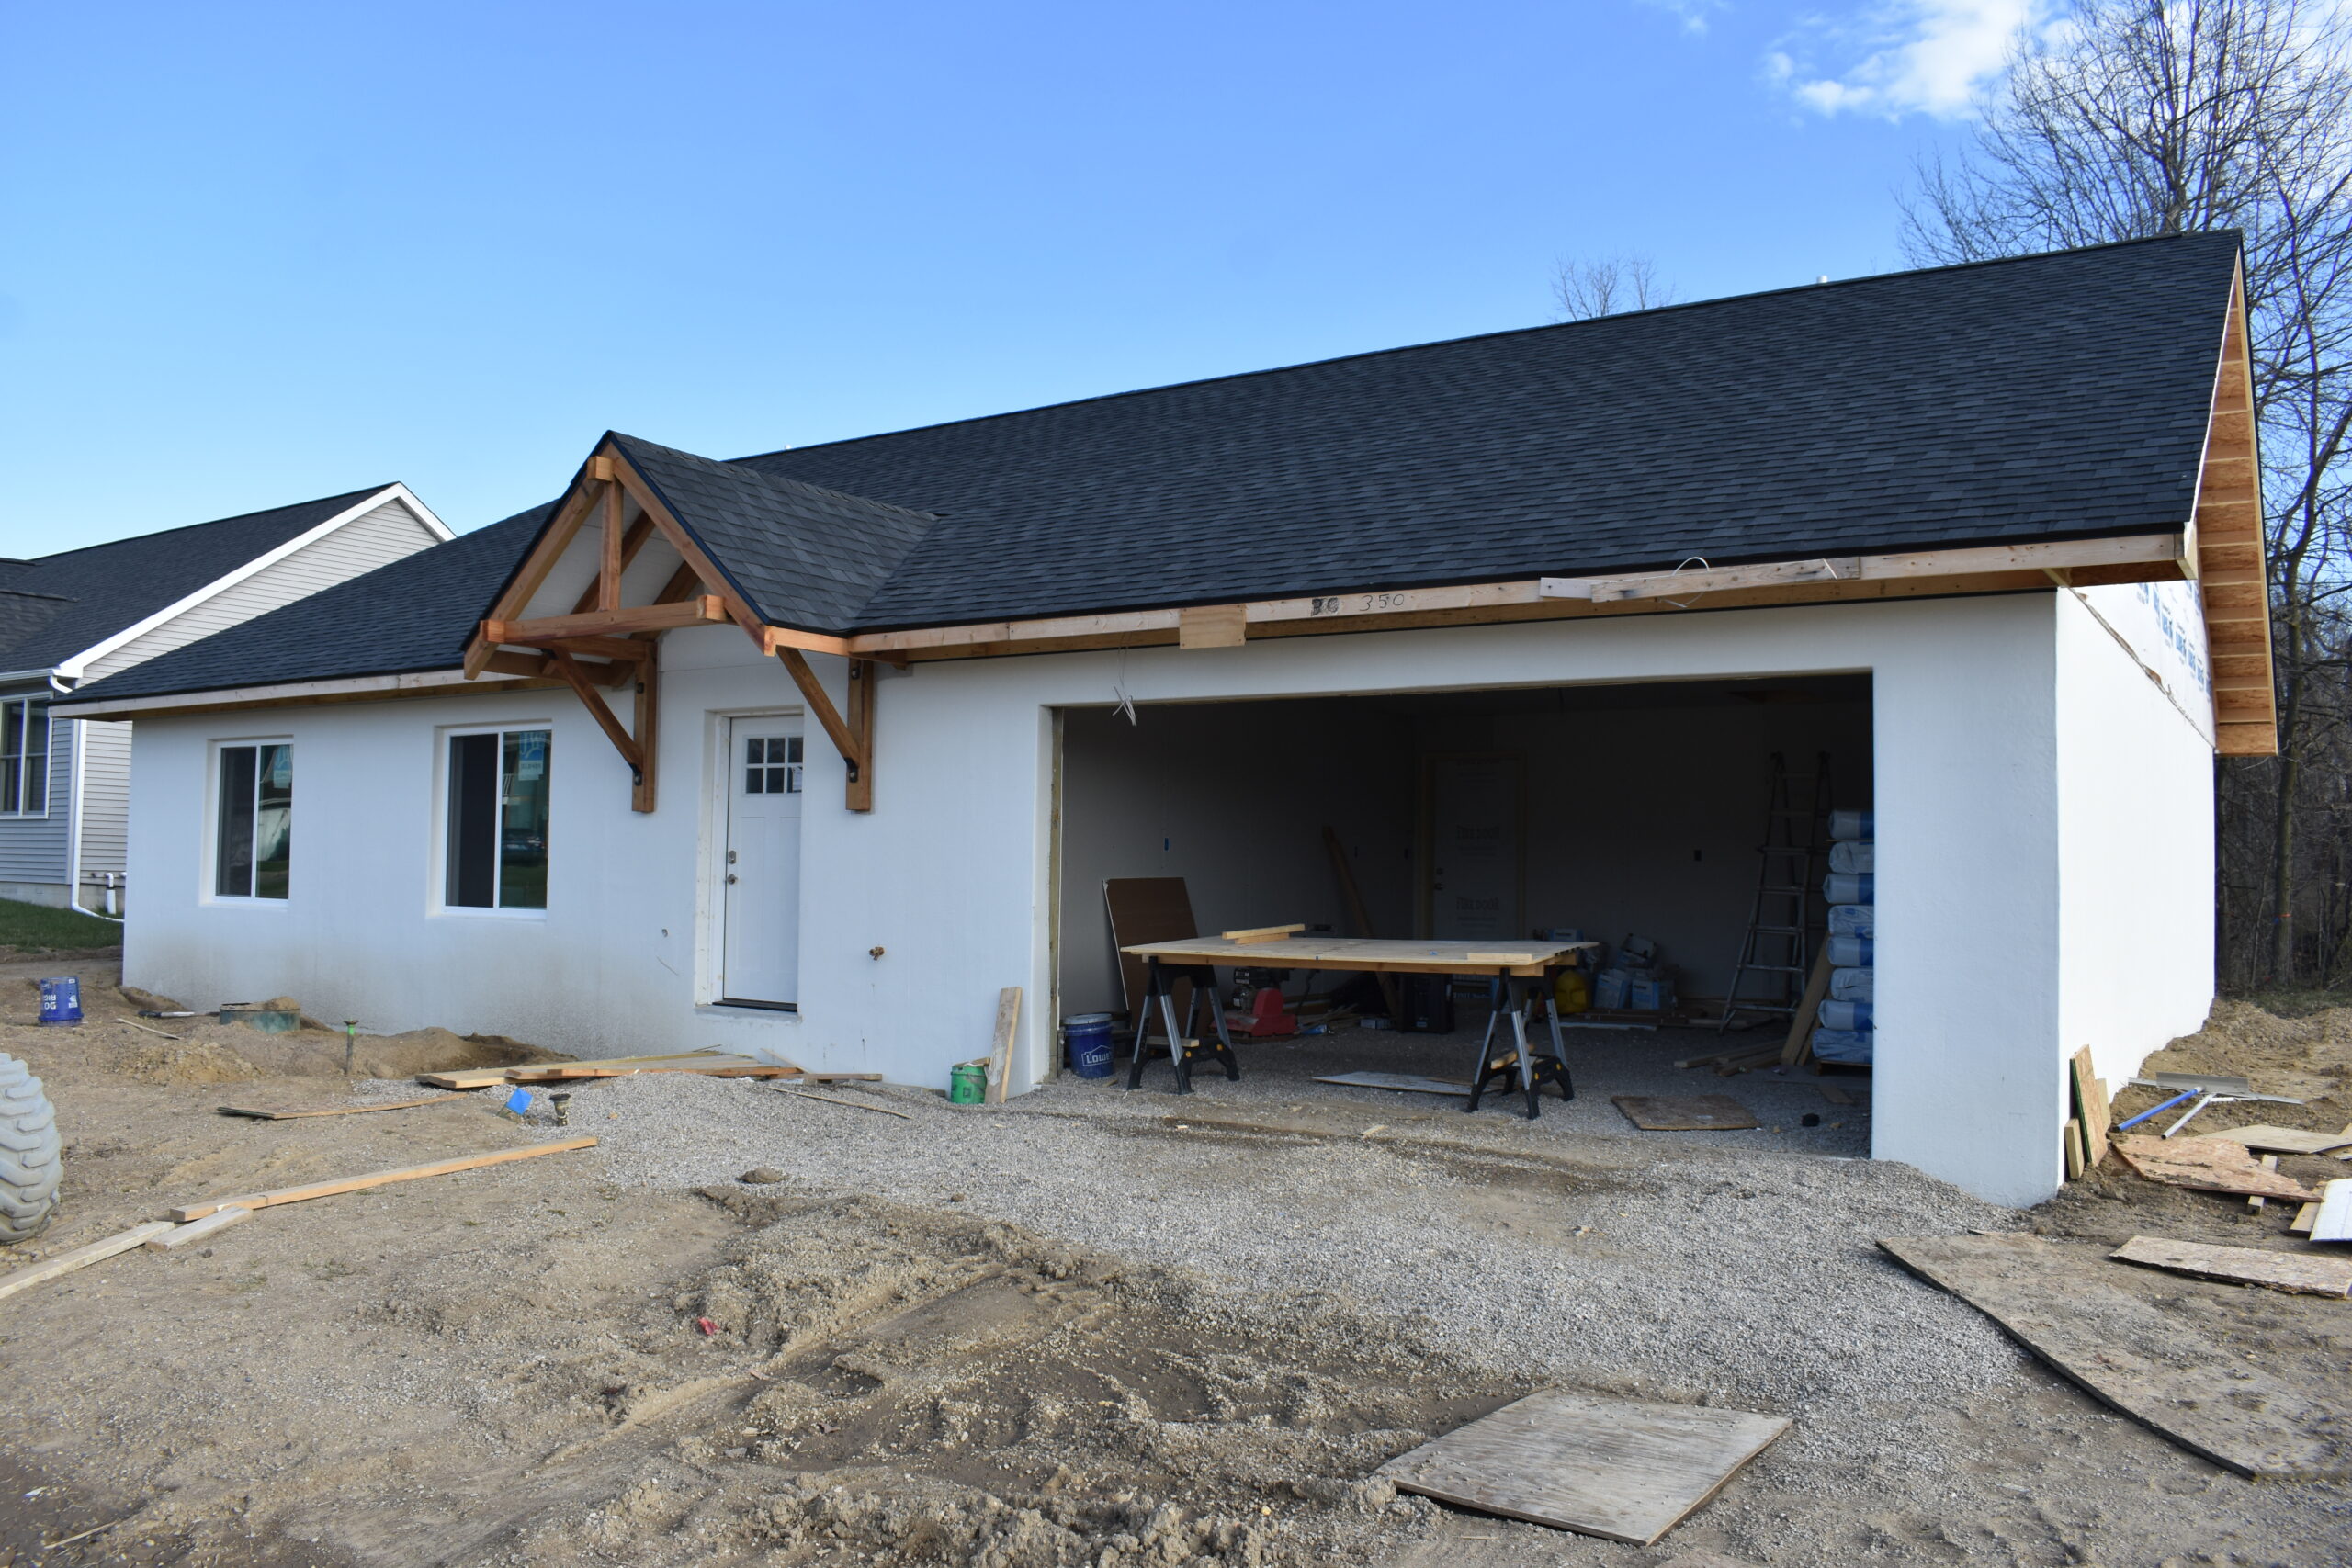 New construction, For sale, Michigan Real Estate, Ranch Home, River Front, Listing Agent, Buyer Agent, 3 Bedroom, New Home, Milan Real Estate, Garage